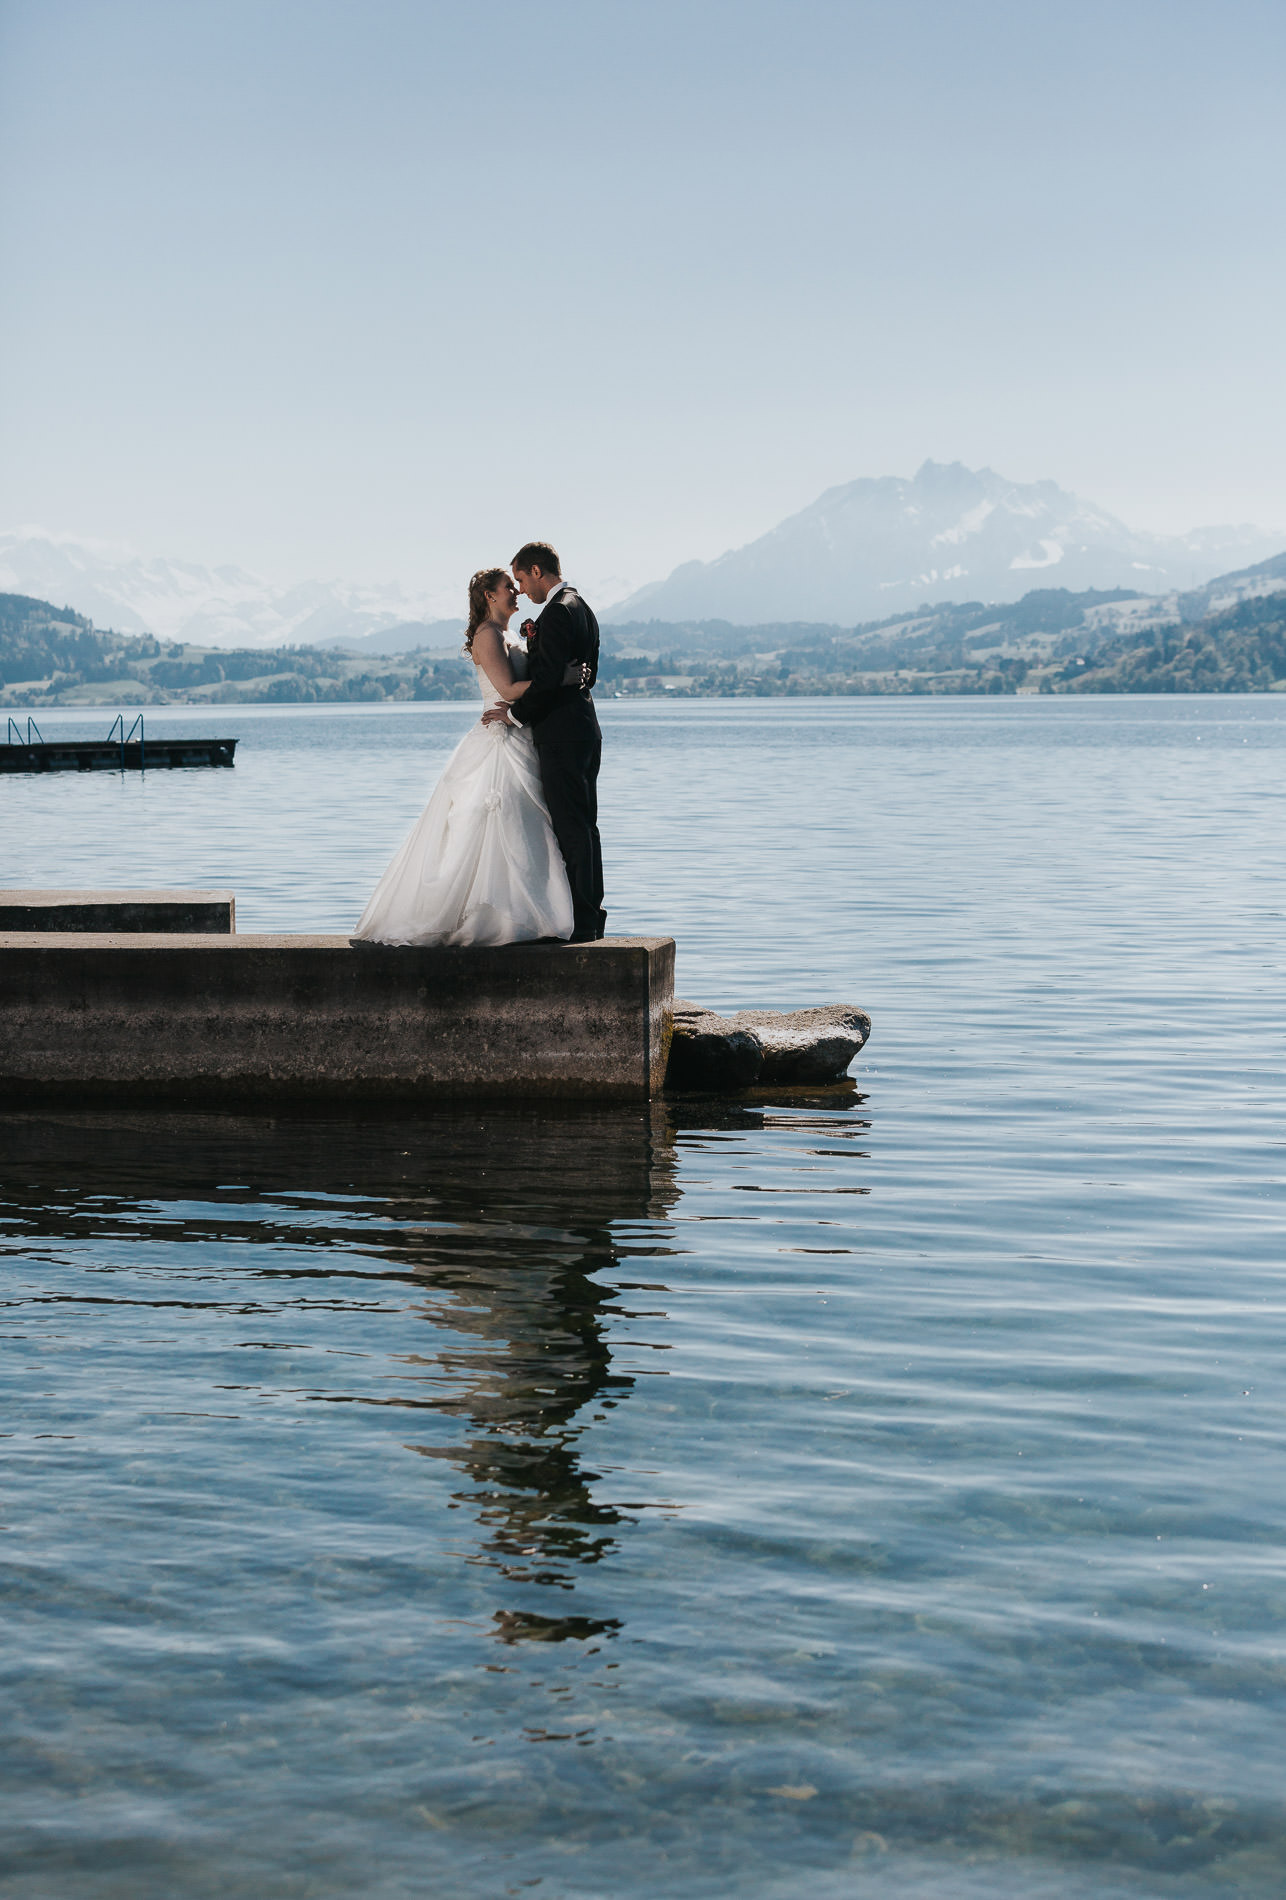 Getting married on Lake Zug in Zug with Pilatus in the background